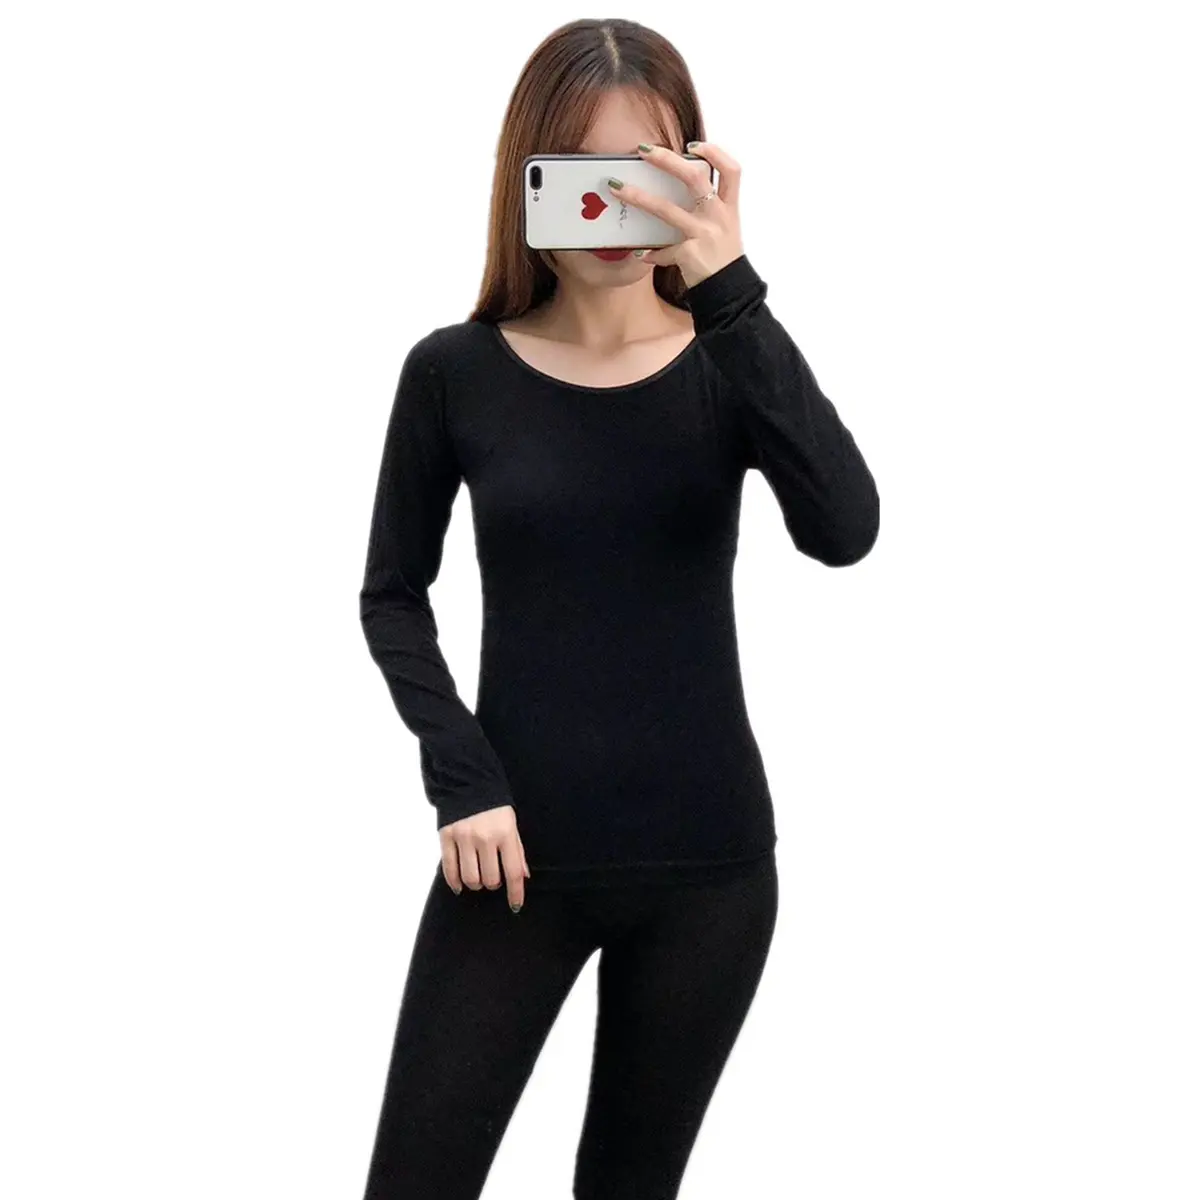 Thermal Underwear Women Long Johns For Women Winter Thermal Underwear Suit Seamless Breathable Warm Thermal Clothing